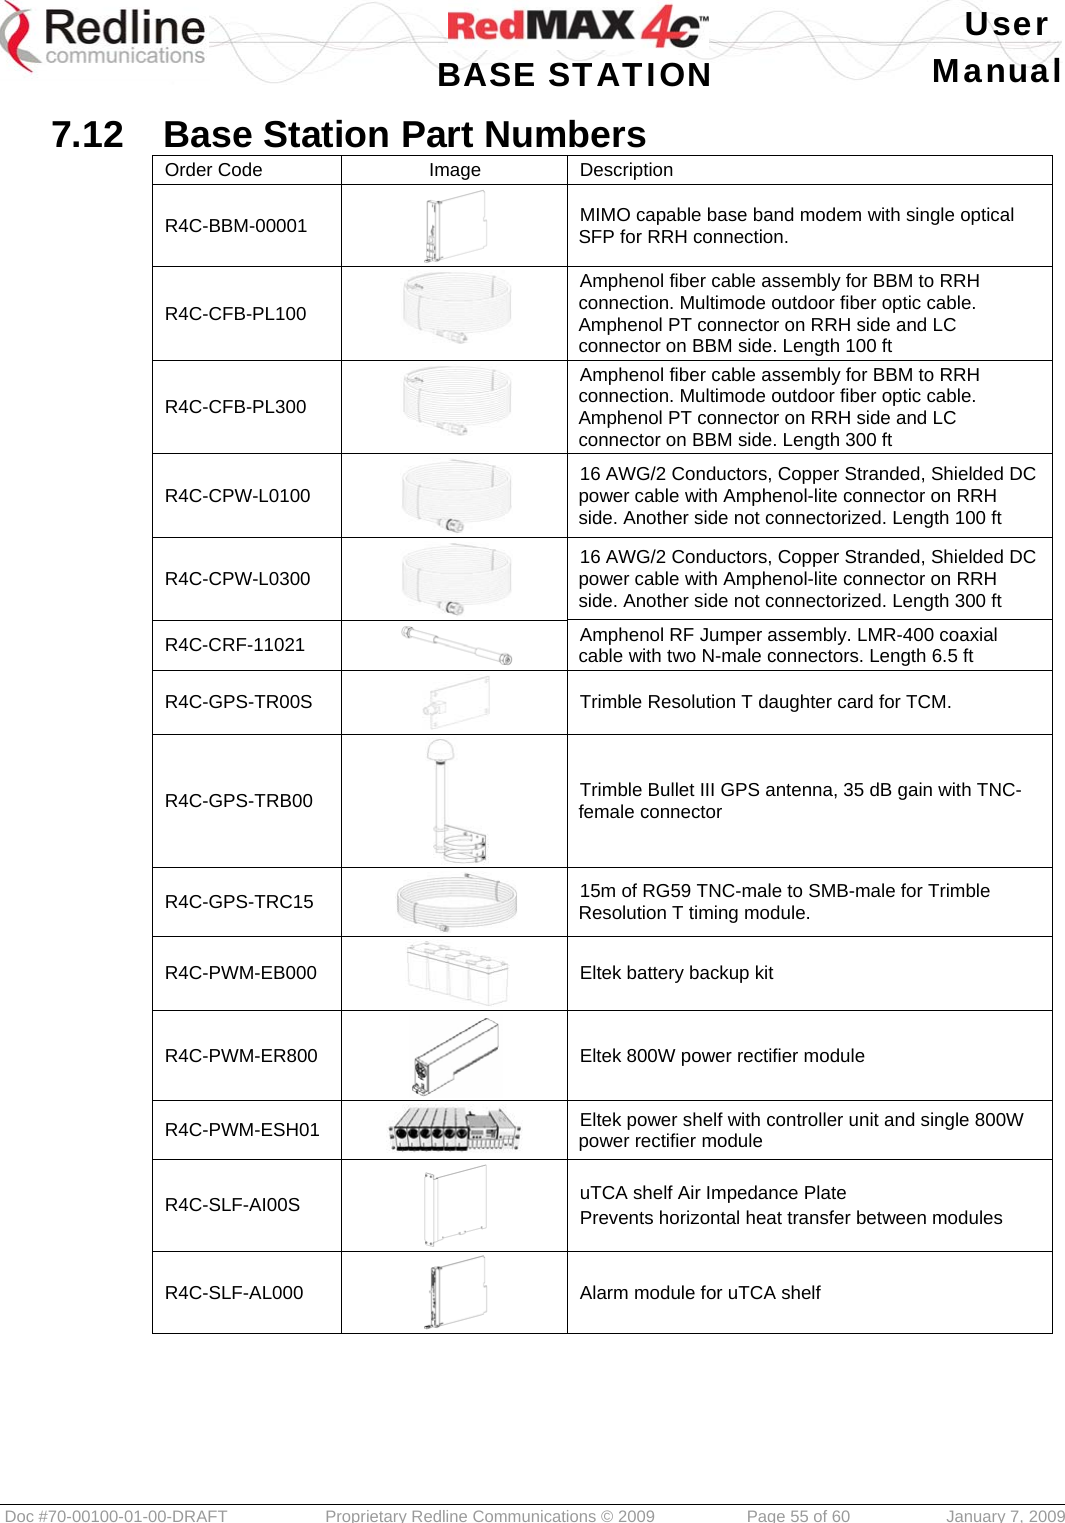   User  BASE STATION Manual  Doc #70-00100-01-00-DRAFT  Proprietary Redline Communications © 2009   Page 55 of 60  January 7, 2009  7.12  Base Station Part Numbers Order Code  Image  Description R4C-BBM-00001  MIMO capable base band modem with single optical SFP for RRH connection.  R4C-CFB-PL100  Amphenol fiber cable assembly for BBM to RRH connection. Multimode outdoor fiber optic cable. Amphenol PT connector on RRH side and LC connector on BBM side. Length 100 ft R4C-CFB-PL300  Amphenol fiber cable assembly for BBM to RRH connection. Multimode outdoor fiber optic cable. Amphenol PT connector on RRH side and LC connector on BBM side. Length 300 ft R4C-CPW-L0100  16 AWG/2 Conductors, Copper Stranded, Shielded DC power cable with Amphenol-lite connector on RRH side. Another side not connectorized. Length 100 ft R4C-CPW-L0300  16 AWG/2 Conductors, Copper Stranded, Shielded DC power cable with Amphenol-lite connector on RRH side. Another side not connectorized. Length 300 ft R4C-CRF-11021   Amphenol RF Jumper assembly. LMR-400 coaxial cable with two N-male connectors. Length 6.5 ft R4C-GPS-TR00S  Trimble Resolution T daughter card for TCM.  R4C-GPS-TRB00  Trimble Bullet III GPS antenna, 35 dB gain with TNC-female connector R4C-GPS-TRC15  15m of RG59 TNC-male to SMB-male for Trimble Resolution T timing module. R4C-PWM-EB000  Eltek battery backup kit R4C-PWM-ER800  Eltek 800W power rectifier module R4C-PWM-ESH01  Eltek power shelf with controller unit and single 800W power rectifier module R4C-SLF-AI00S  uTCA shelf Air Impedance Plate Prevents horizontal heat transfer between modules R4C-SLF-AL000  Alarm module for uTCA shelf 